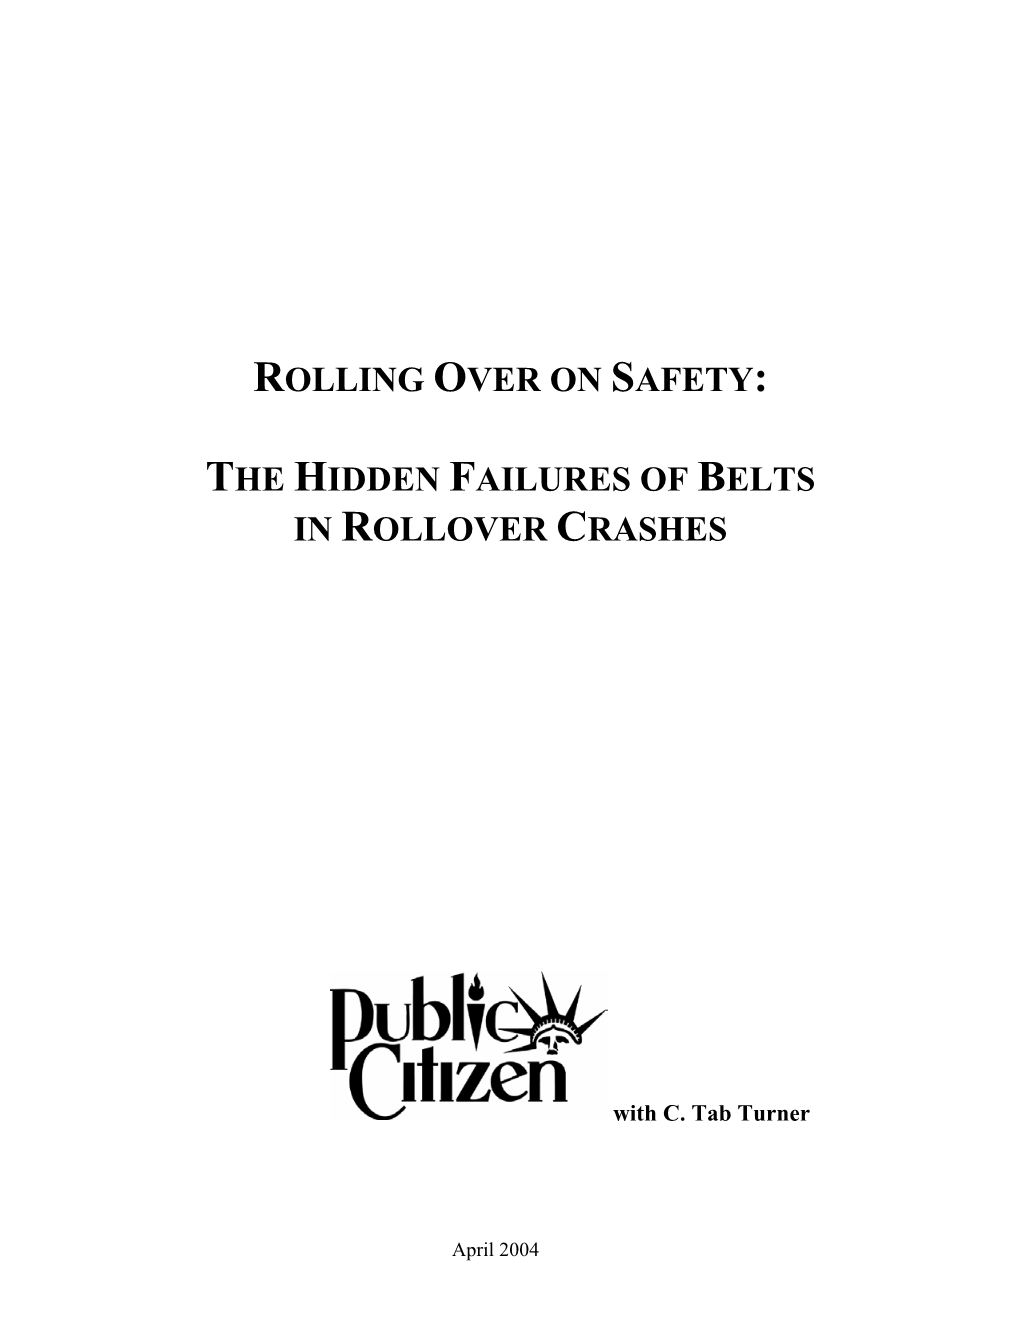 Rolling Over on Safety: the Hidden Failures of Belts in Rollover Crashes